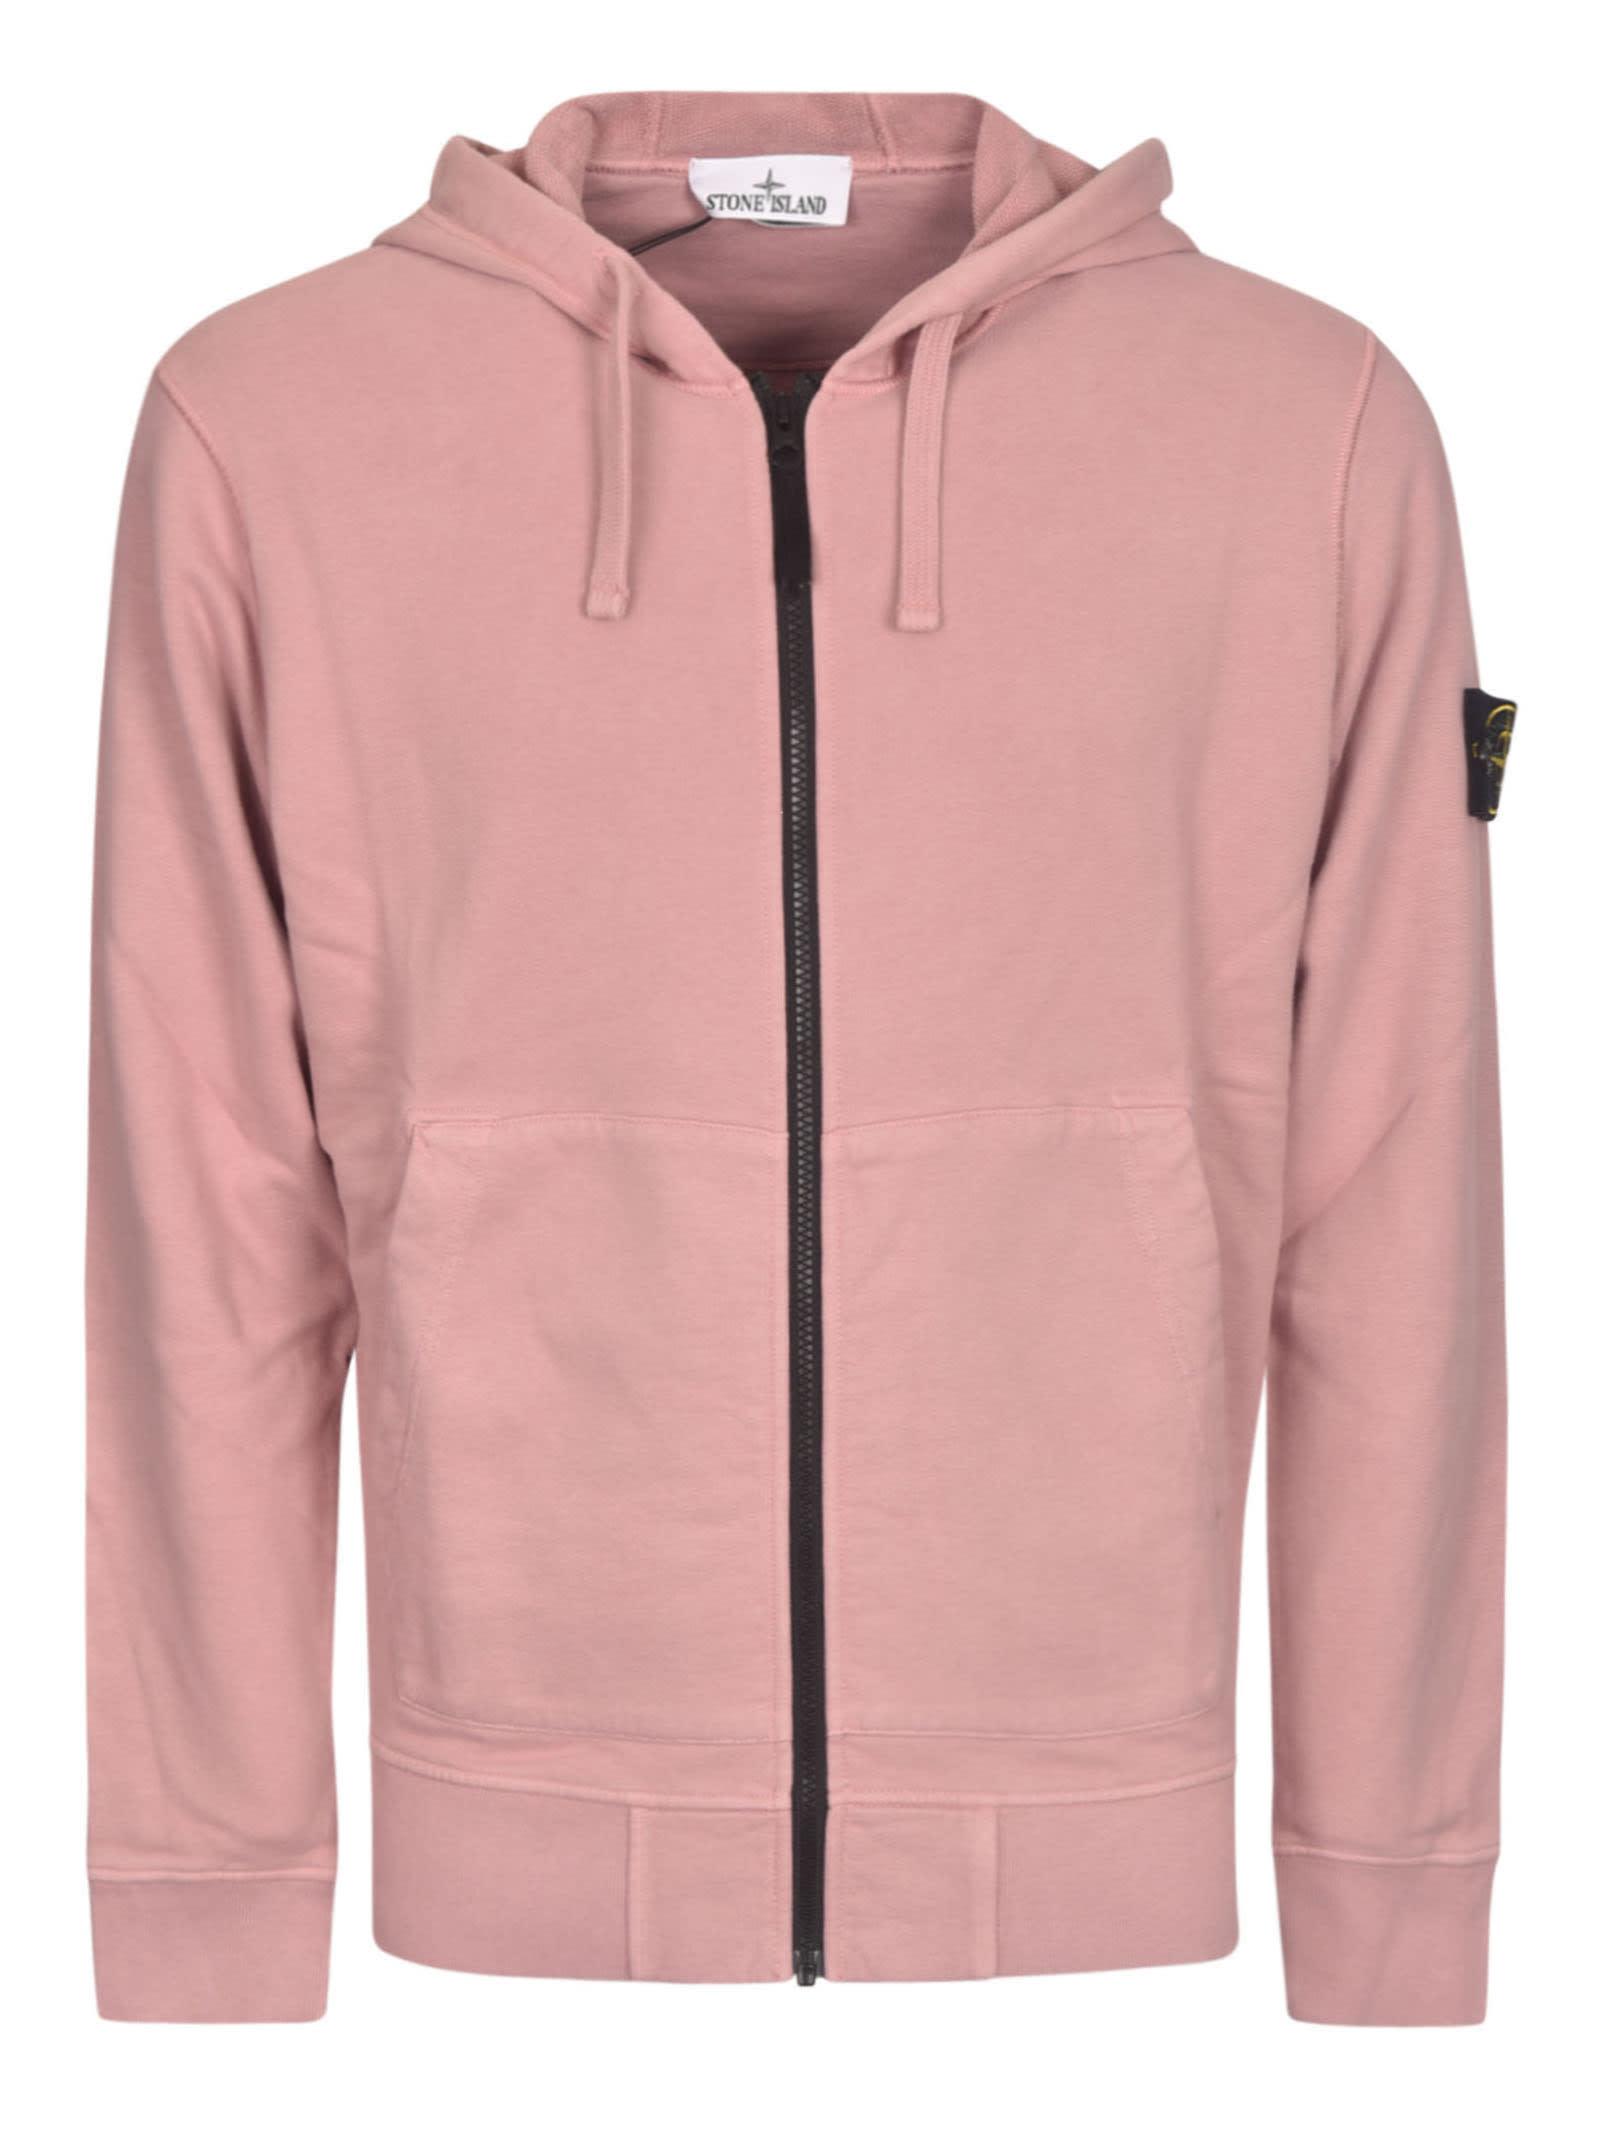 Stone Island Cotton Logo Sleeve Zip Hoodie in Pink for Men - Save 40% | Lyst